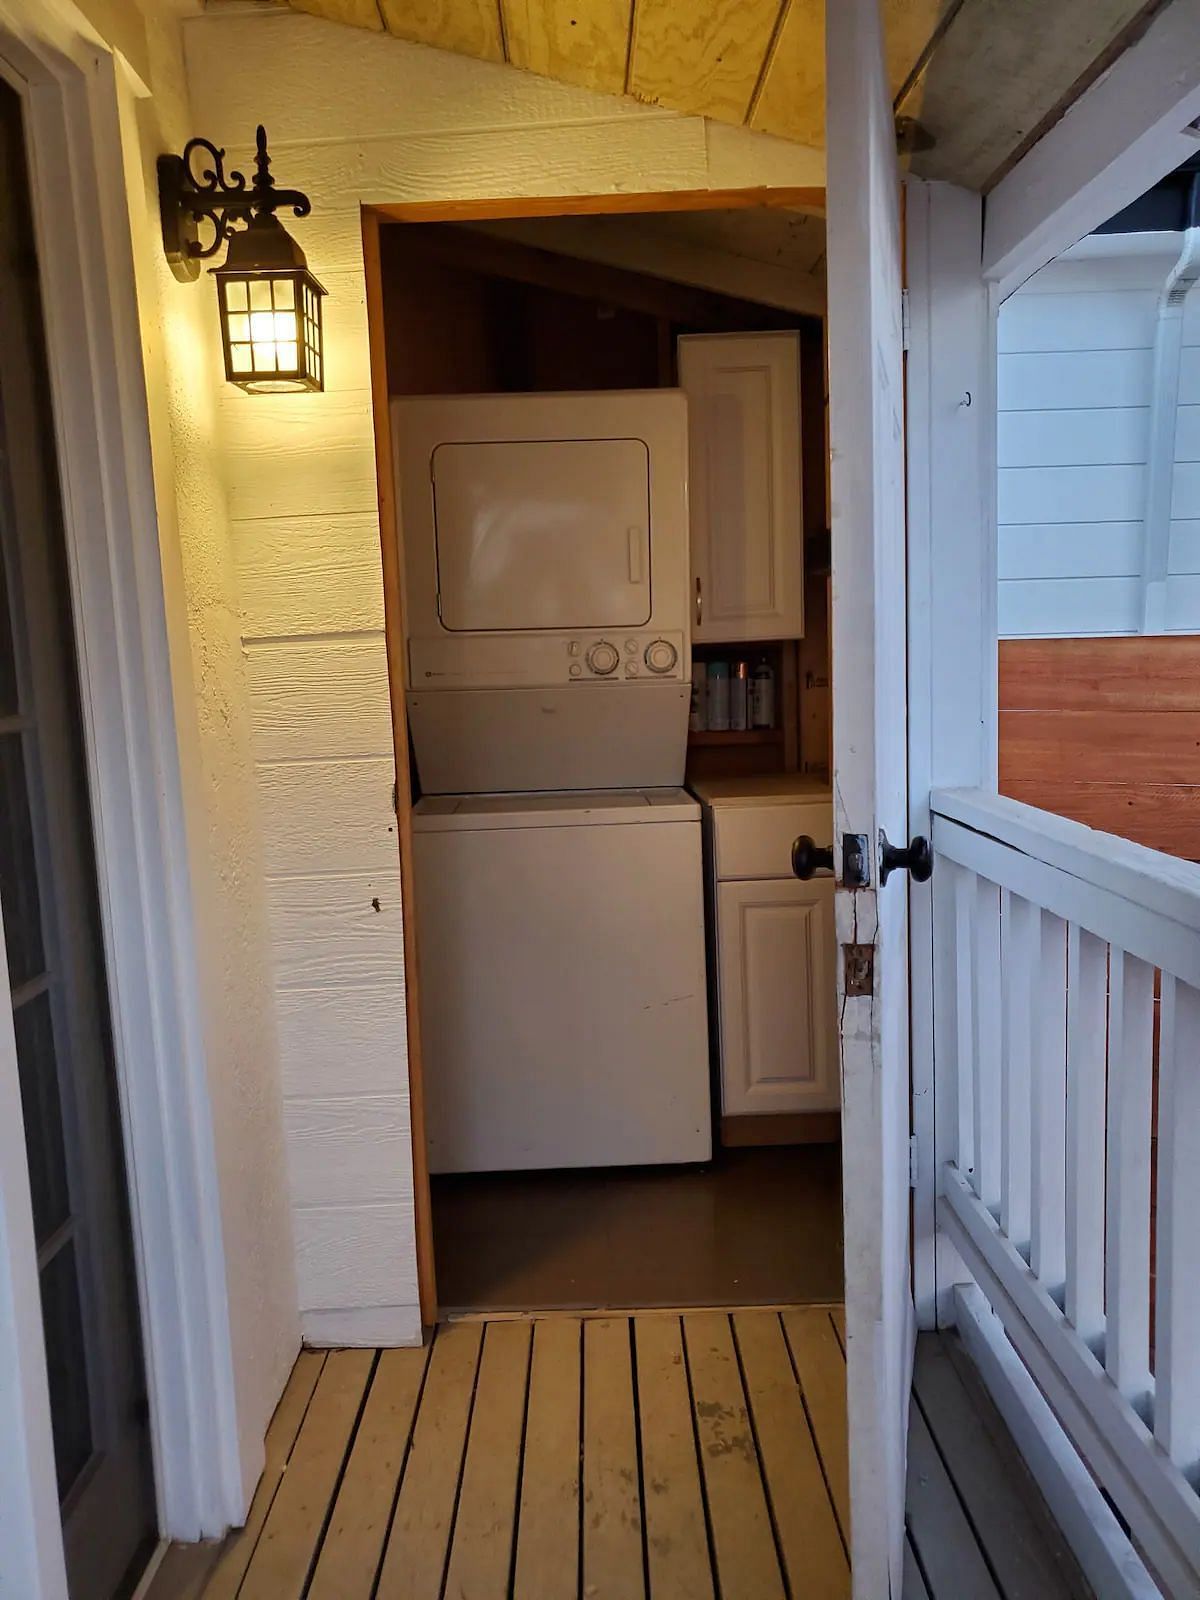 JWguest House at Imperial Beach, California | Tiny home in beach town | Jwbnb no brobnb 12